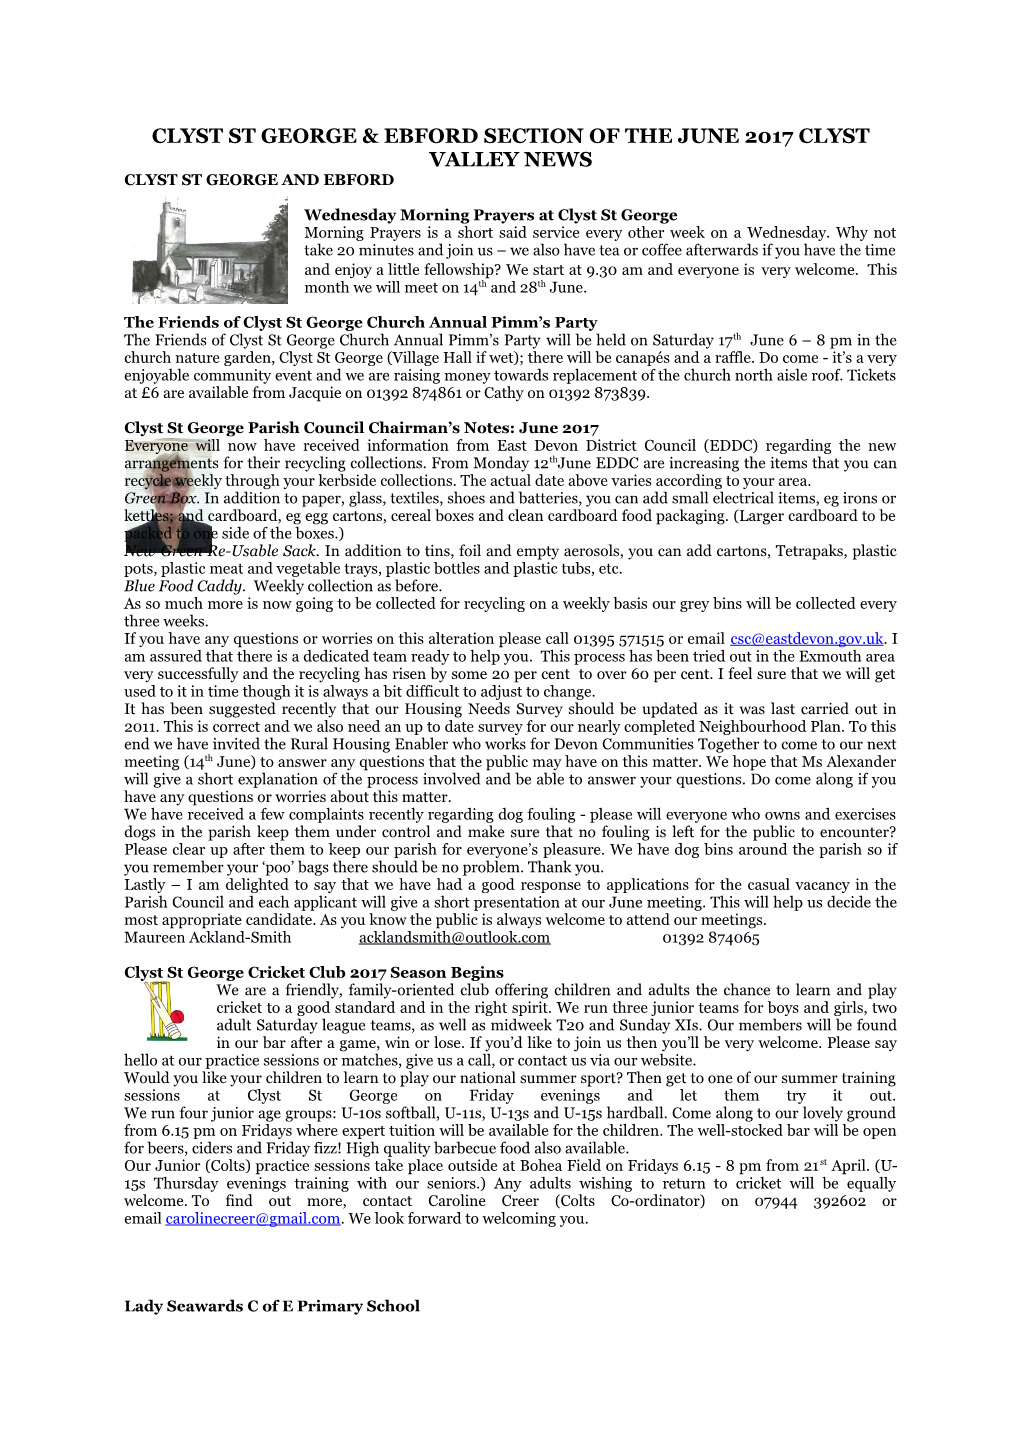 Clyst St George & Ebford Section of the June 2017 Clyst Valley News